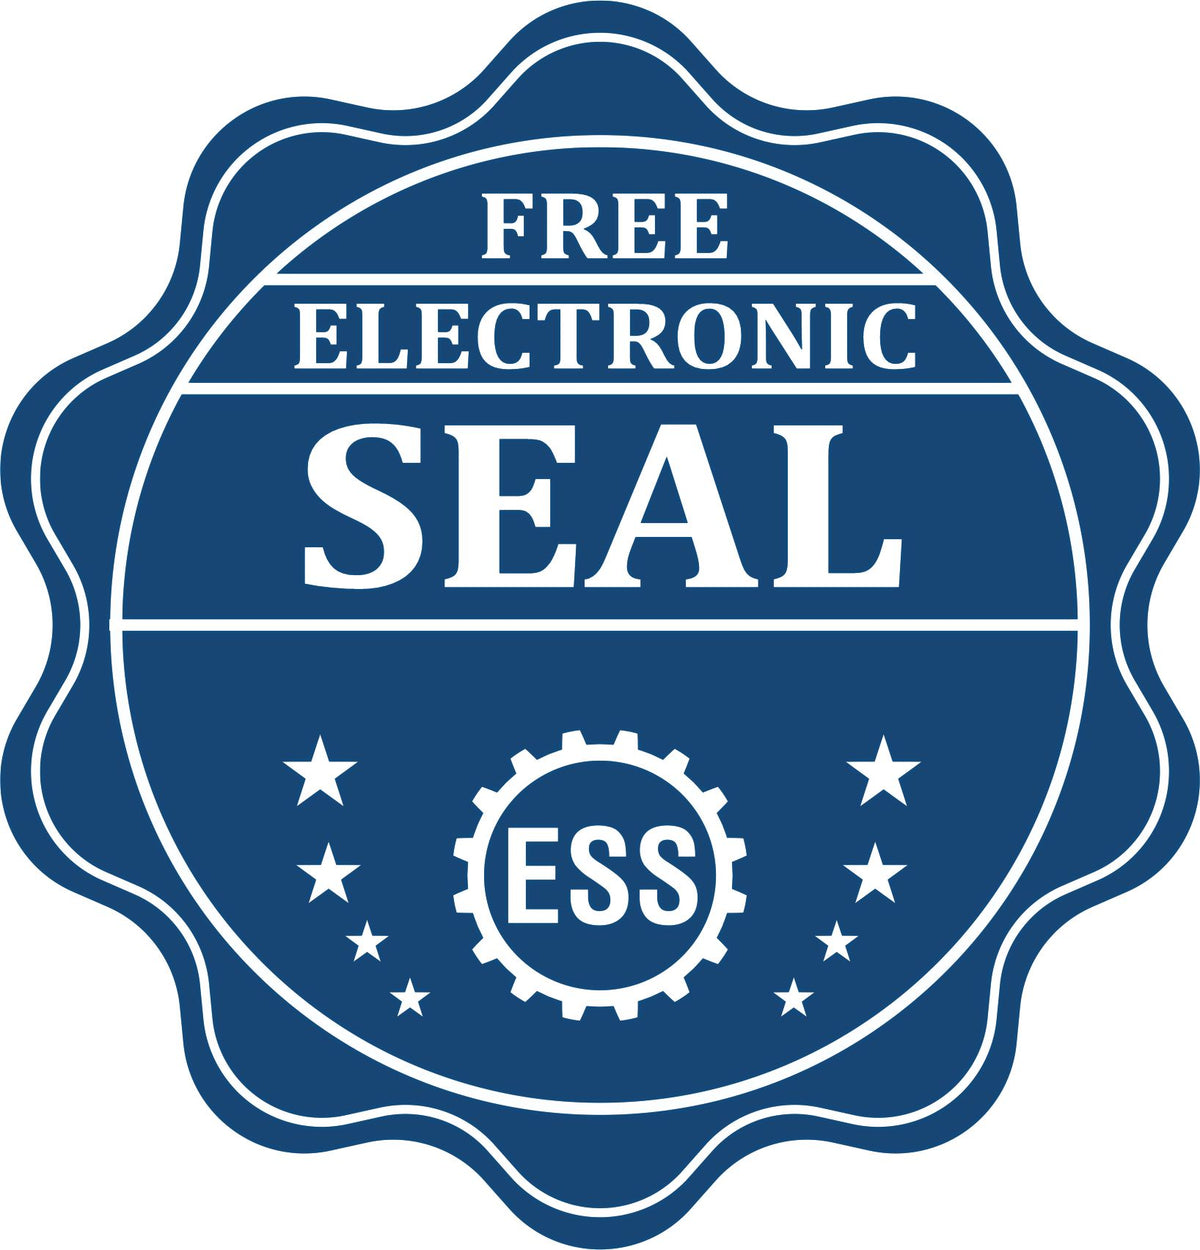 A badge showing a free electronic seal for the State of Maine Soft Land Surveyor Embossing Seal with stars and the ESS gear on the emblem.